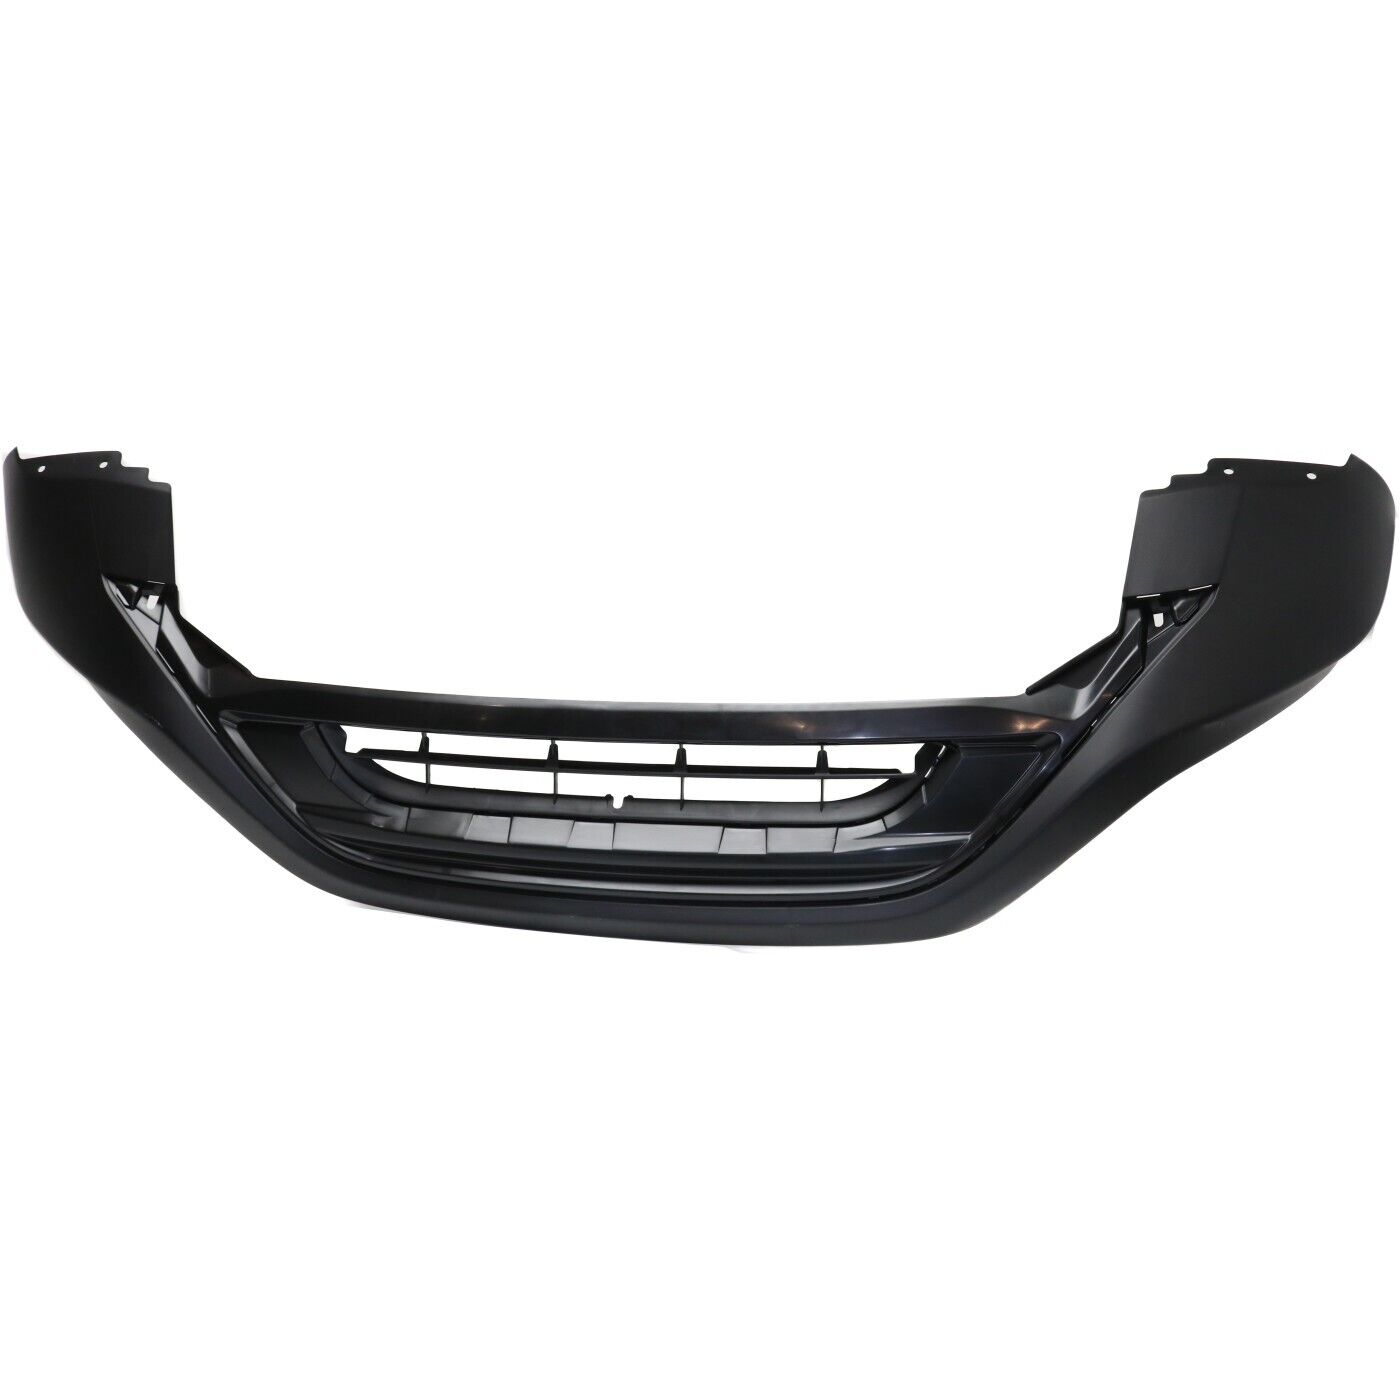 2015-2016 HONDA CR-V; Front Bumper Cover lower; Painted to Match